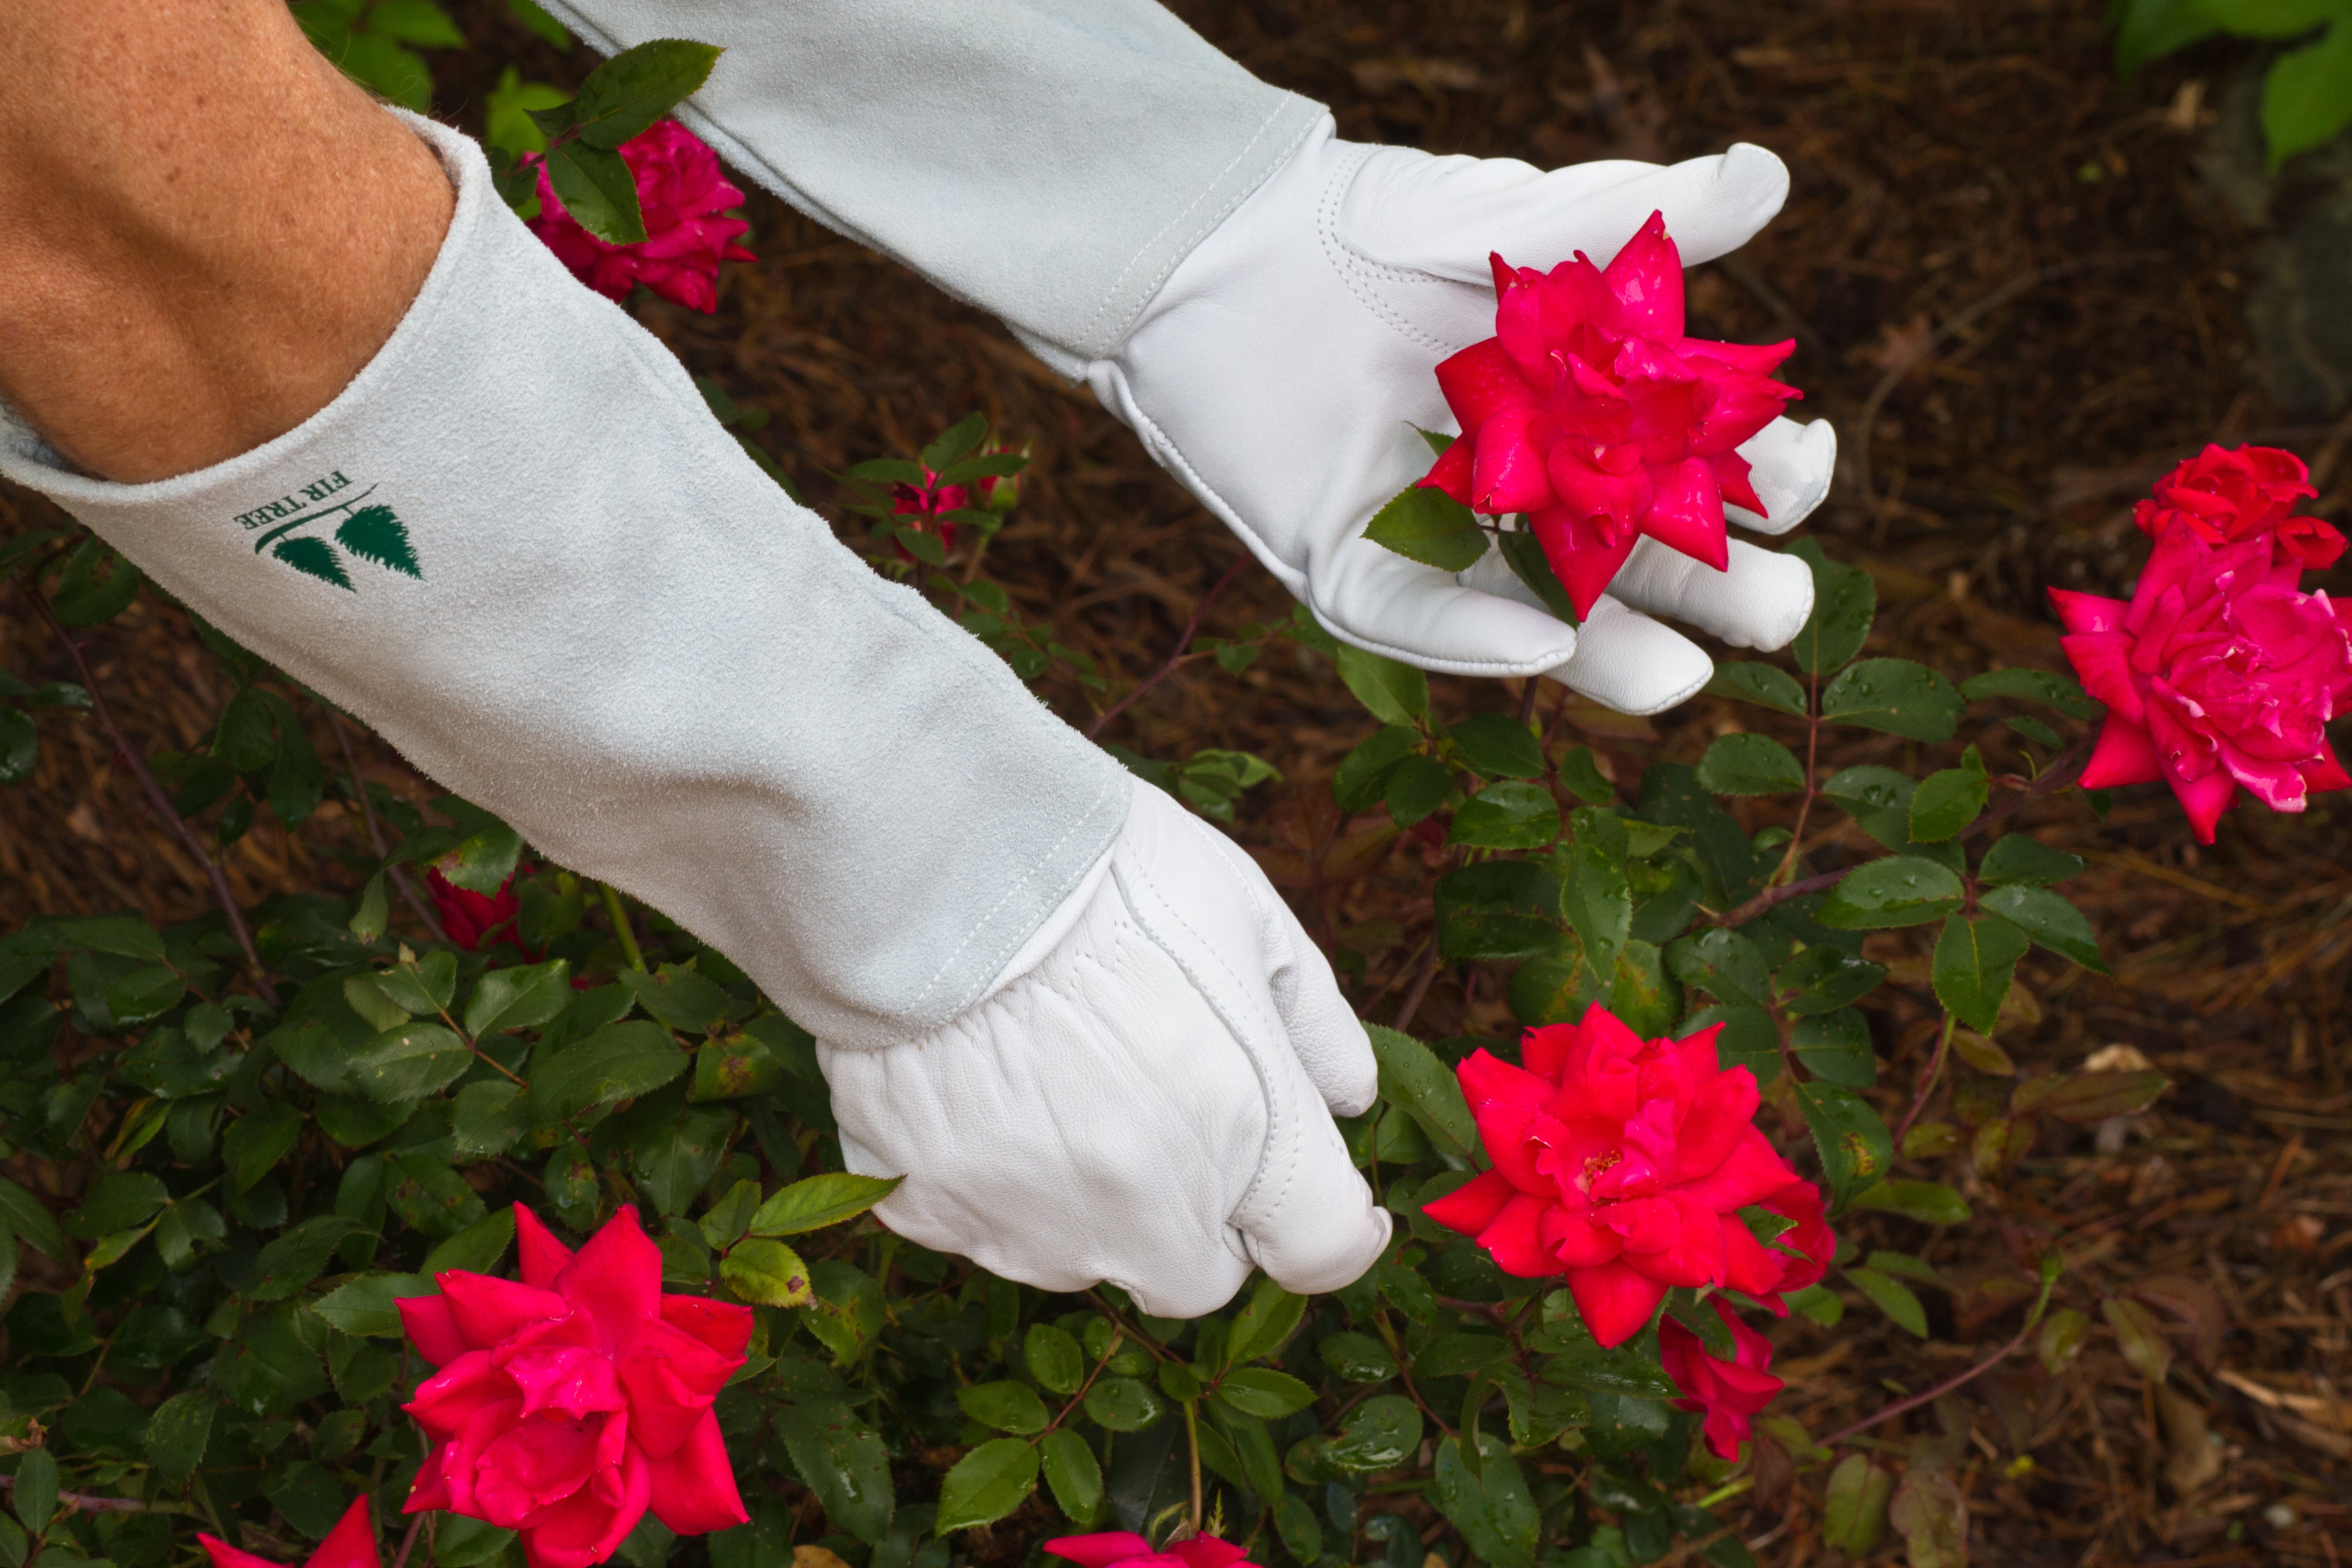 Goatskin Gauntlet Gloves are great for rose pruning